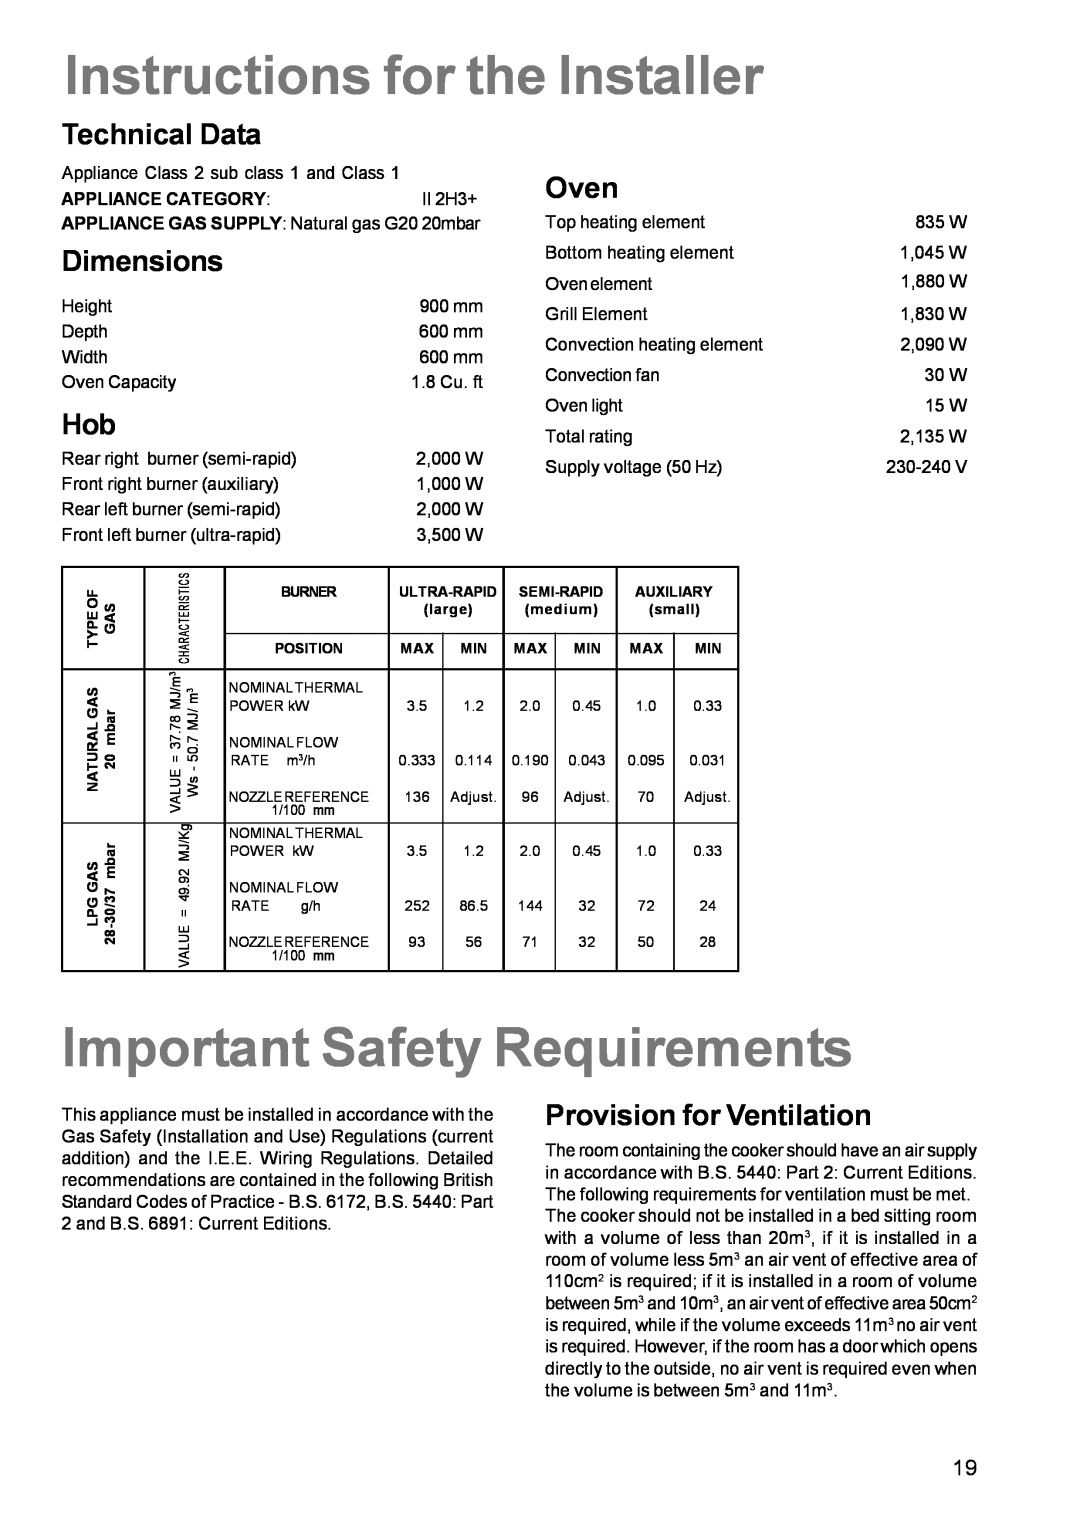 Zanussi ZCM 631 manual Instructions for the Installer, Important Safety Requirements, Technical Data, Dimensions, Oven 